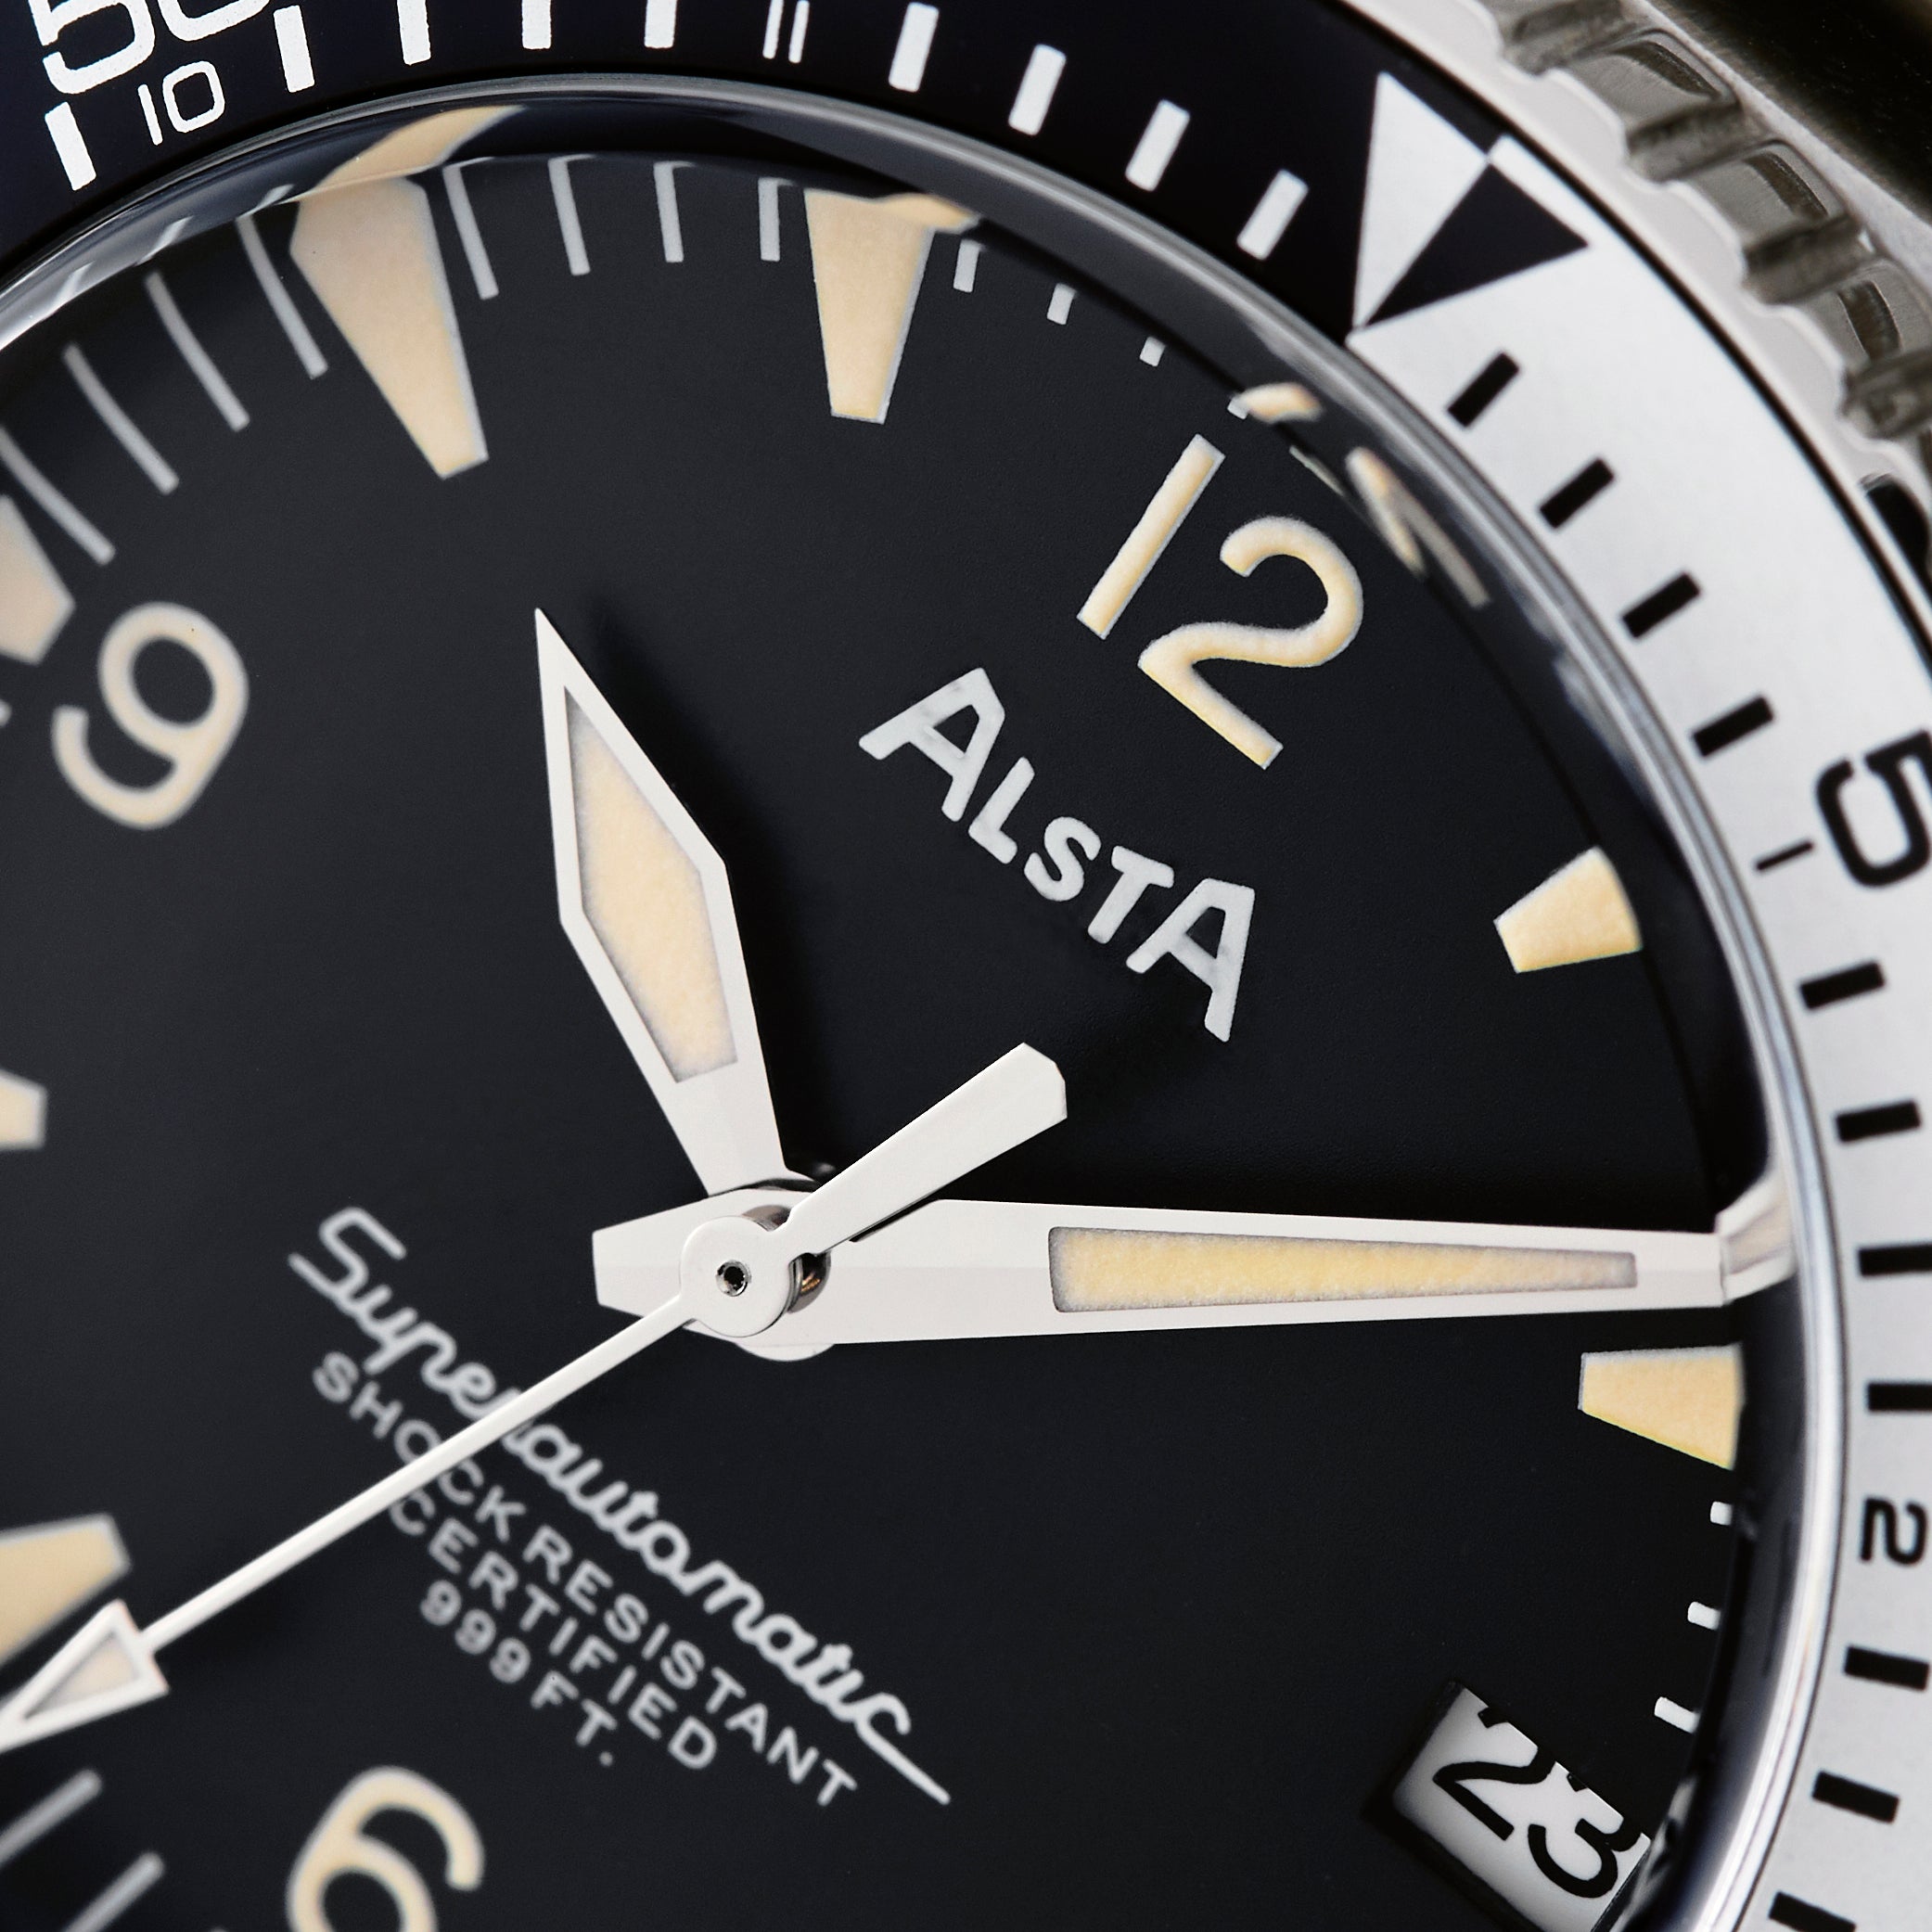 The Alsta Nautoscaph Superautomatic – Made Famous By Richard Dreyfuss In 